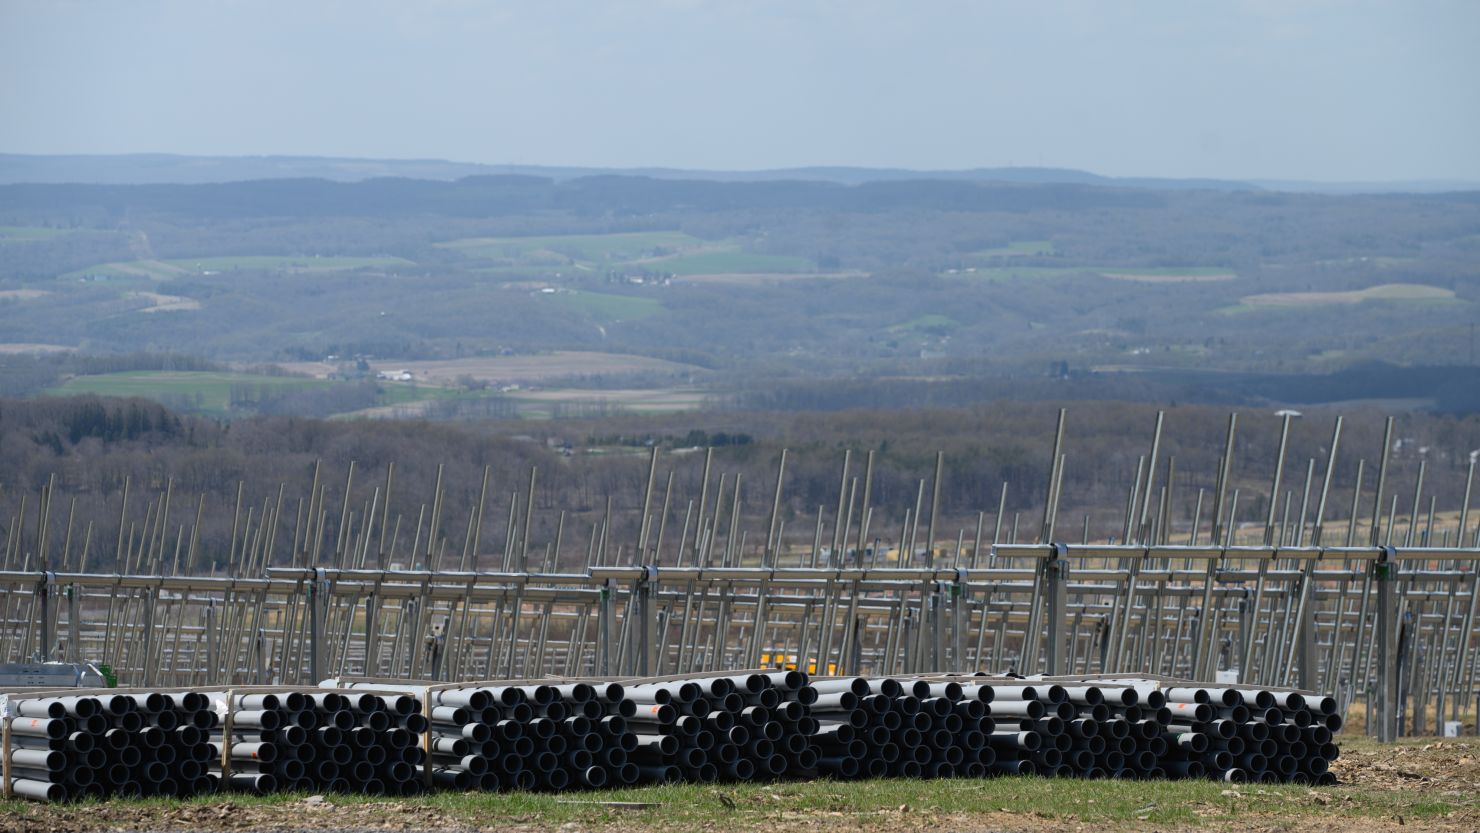 Racking systems to hold solar panels sit empty on top of an old strip mine in Portage, Pennsylvania, on Monday, April 25.The fallout from a trade probe is rippling through the US solar industry, delaying projects and threatening to slow the renewable energy transition.